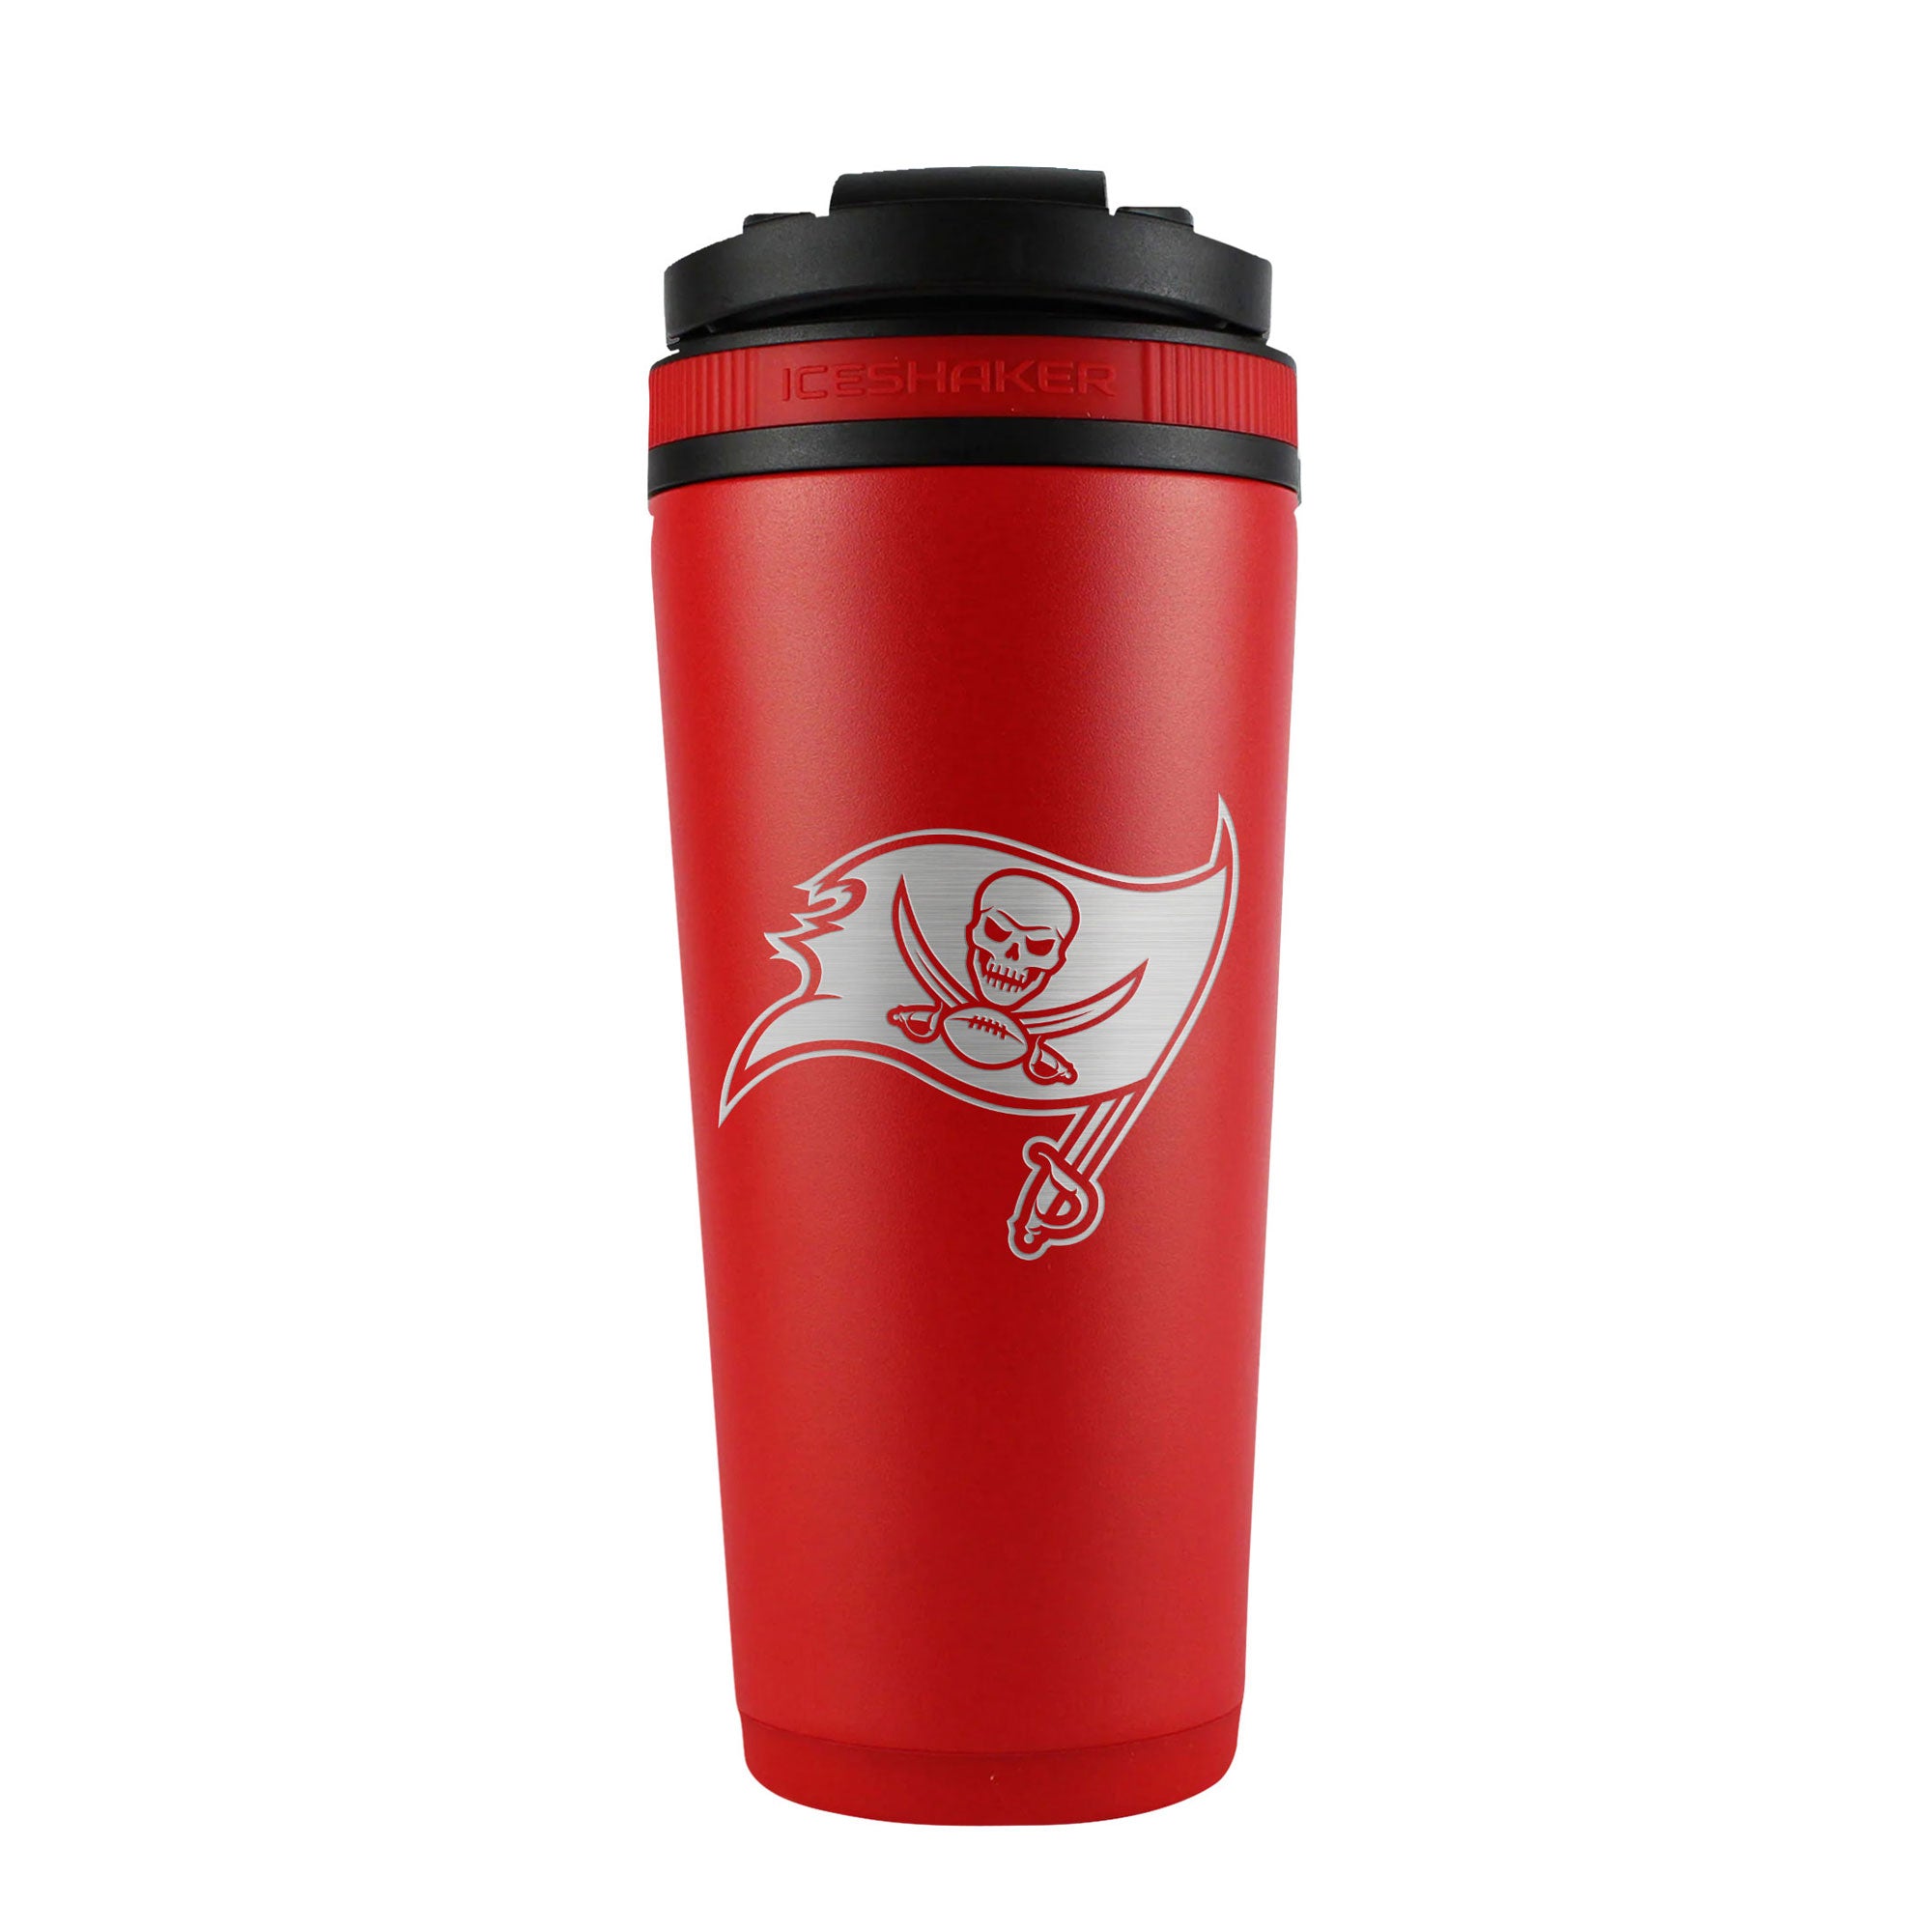 Officially Licensed Tampa Bay Buccaneers 26oz Ice Shaker